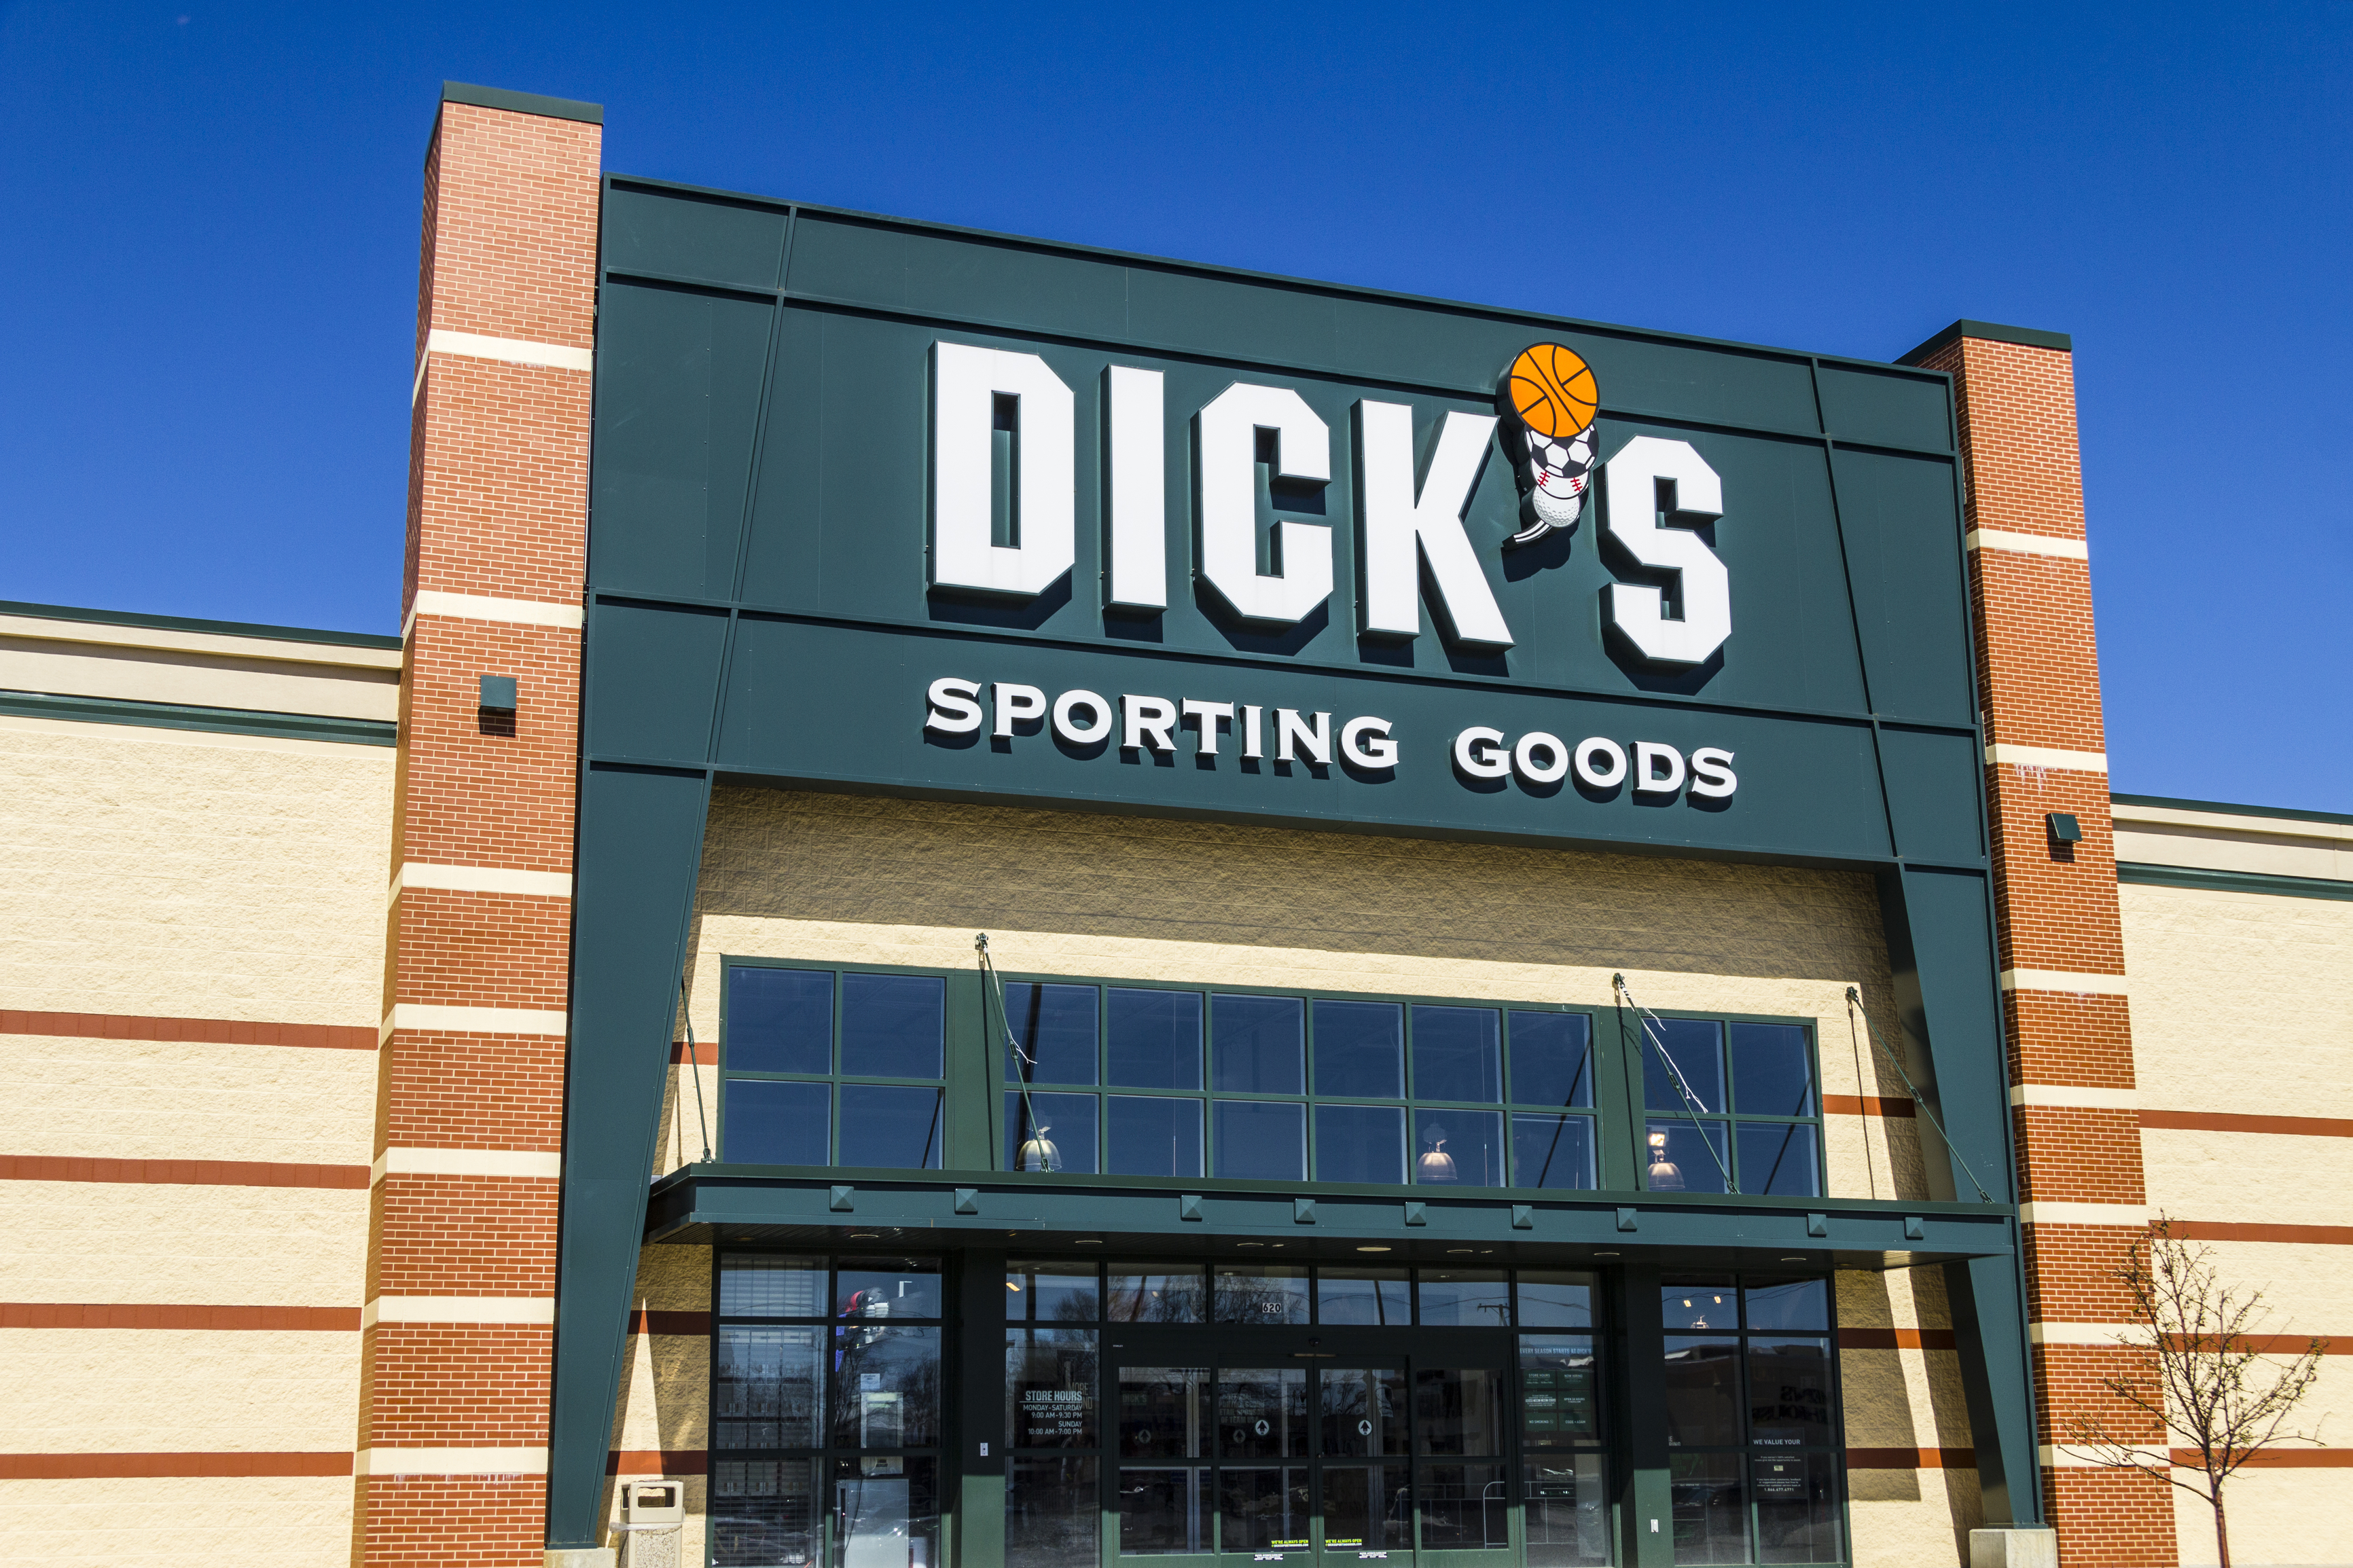 Dick’s Sporting Goods coupon: Save $15 on a footwear purchase of $69.99 or more